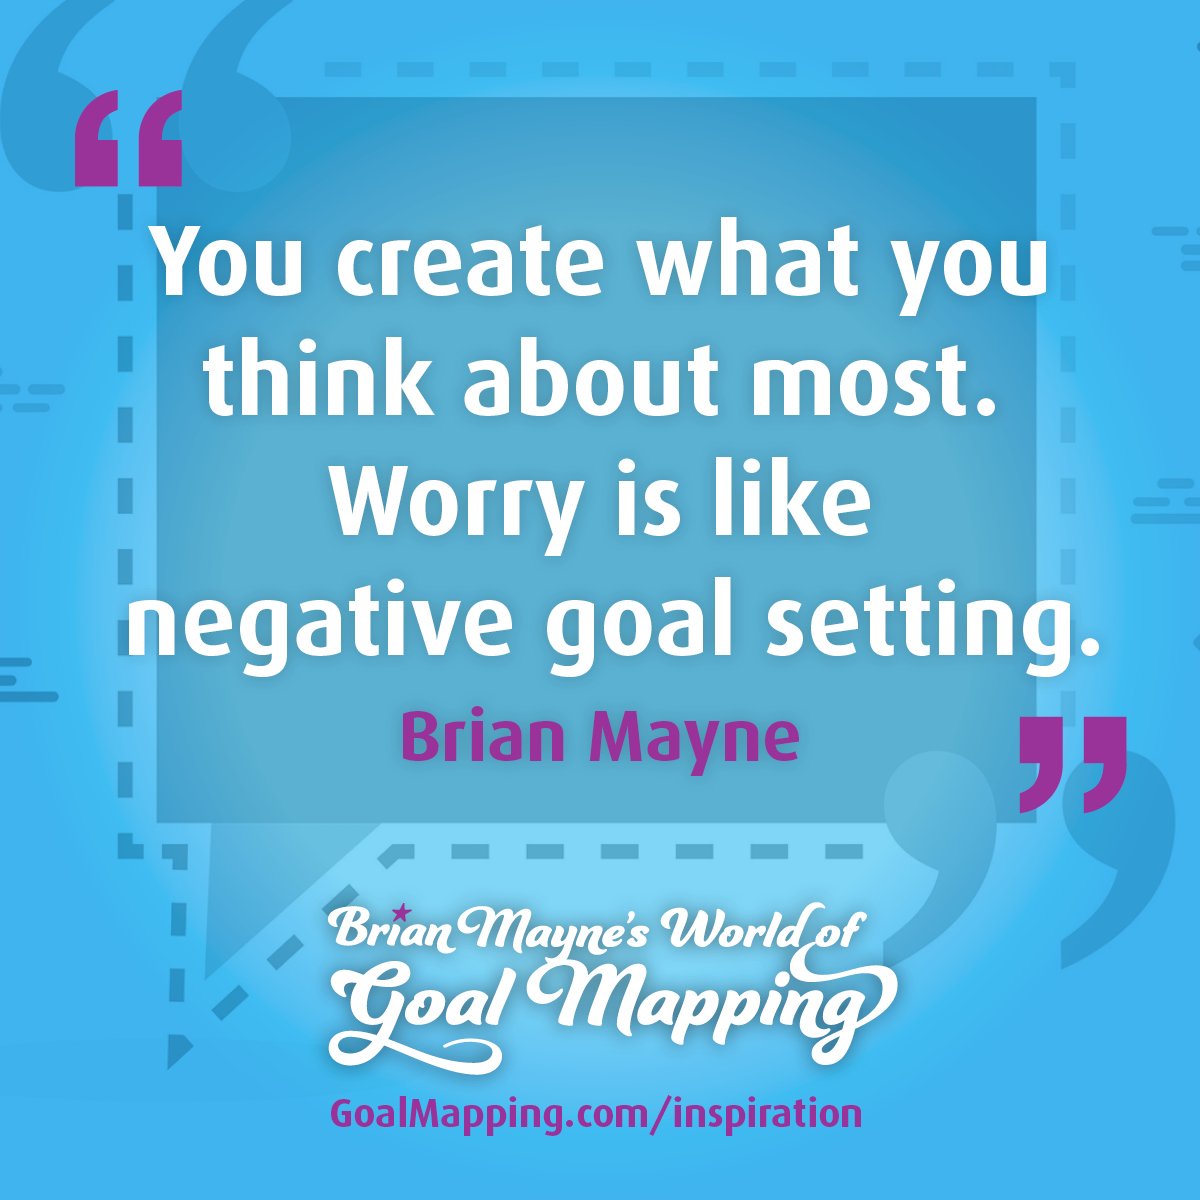 "You create what you think about most. Worry is like negative goal setting." Brian Mayne